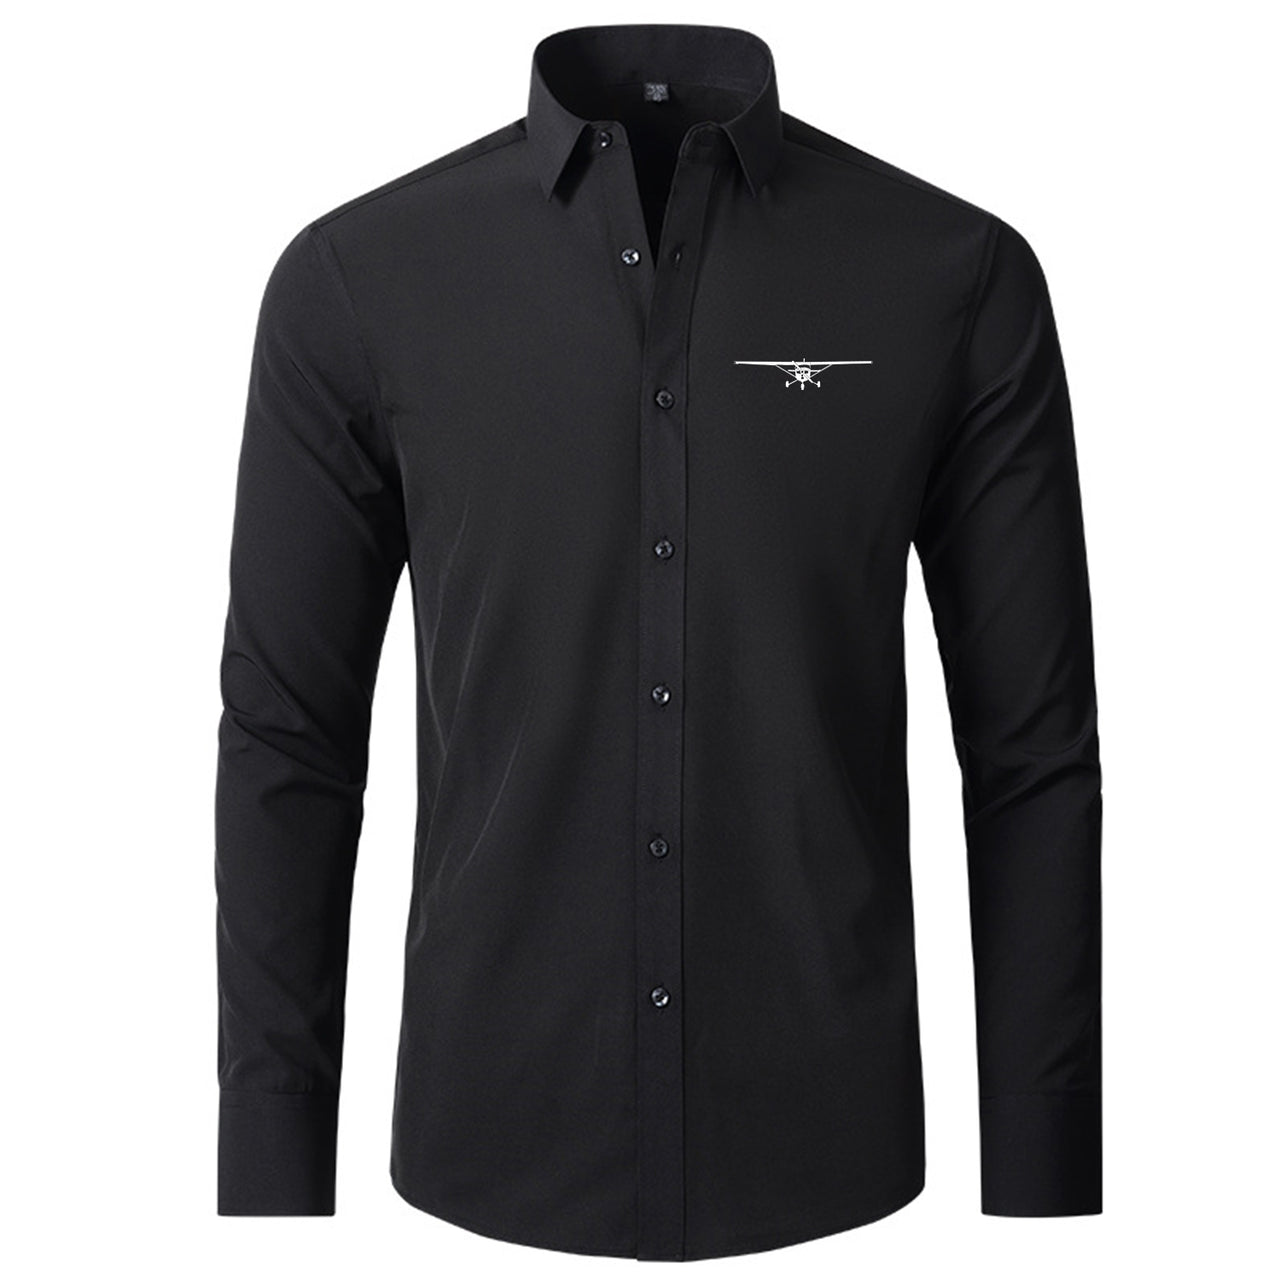 Cessna 172 Silhouette Designed Long Sleeve Shirts